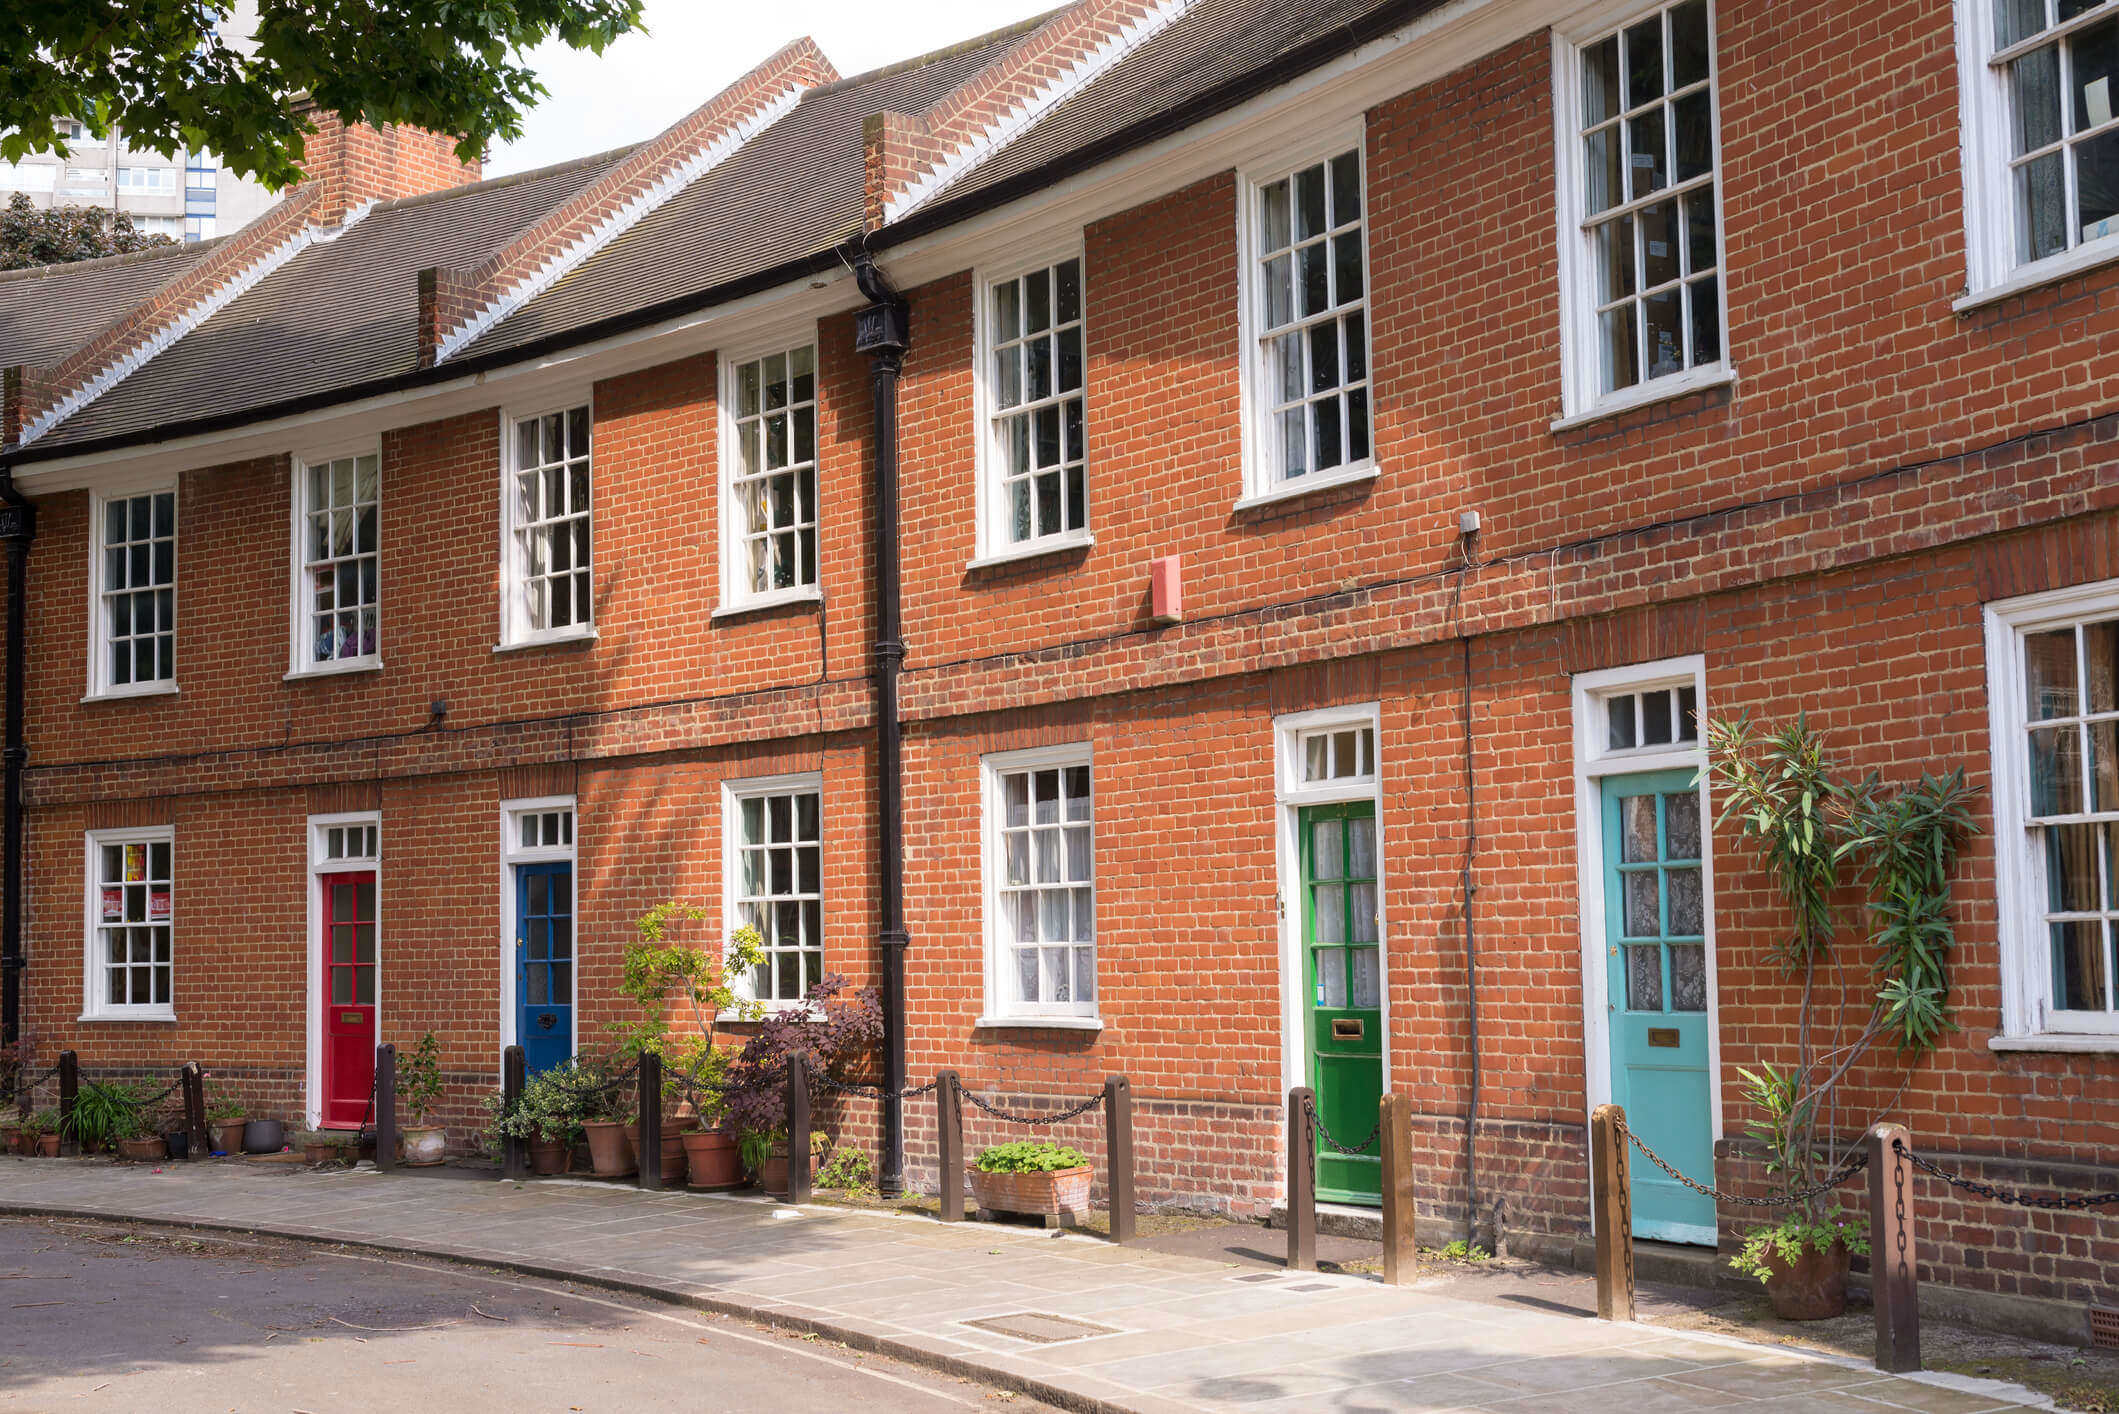 Restored Victorian red brick houses with coloured doors